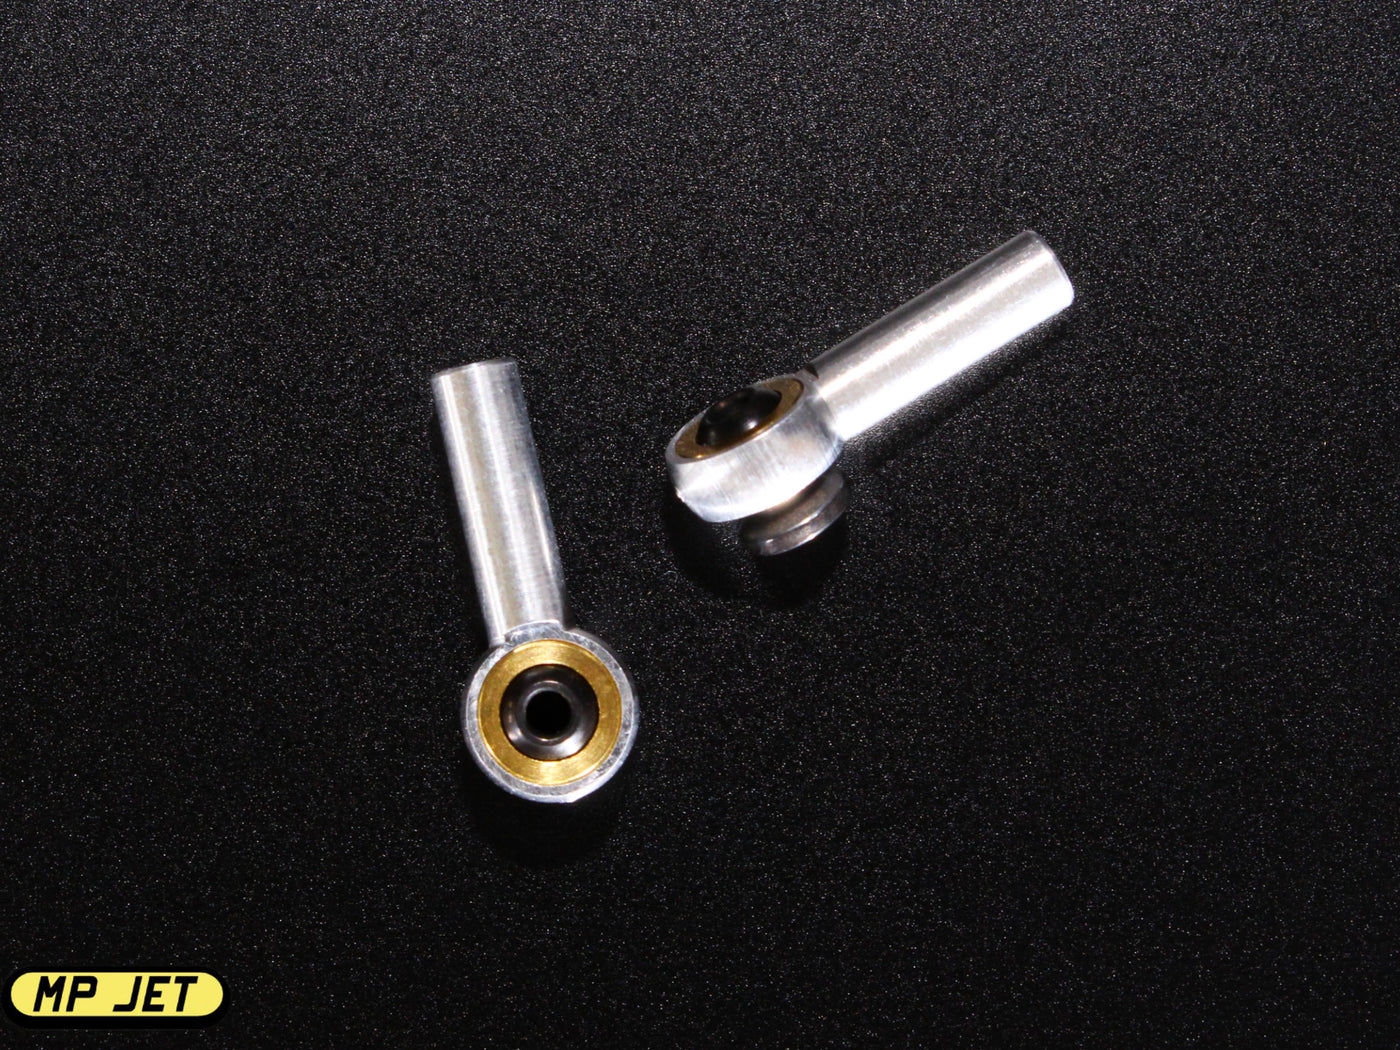 MP Jet Ball Link V3 / 5mm ball with Offset Flange and 2mm hole / M3